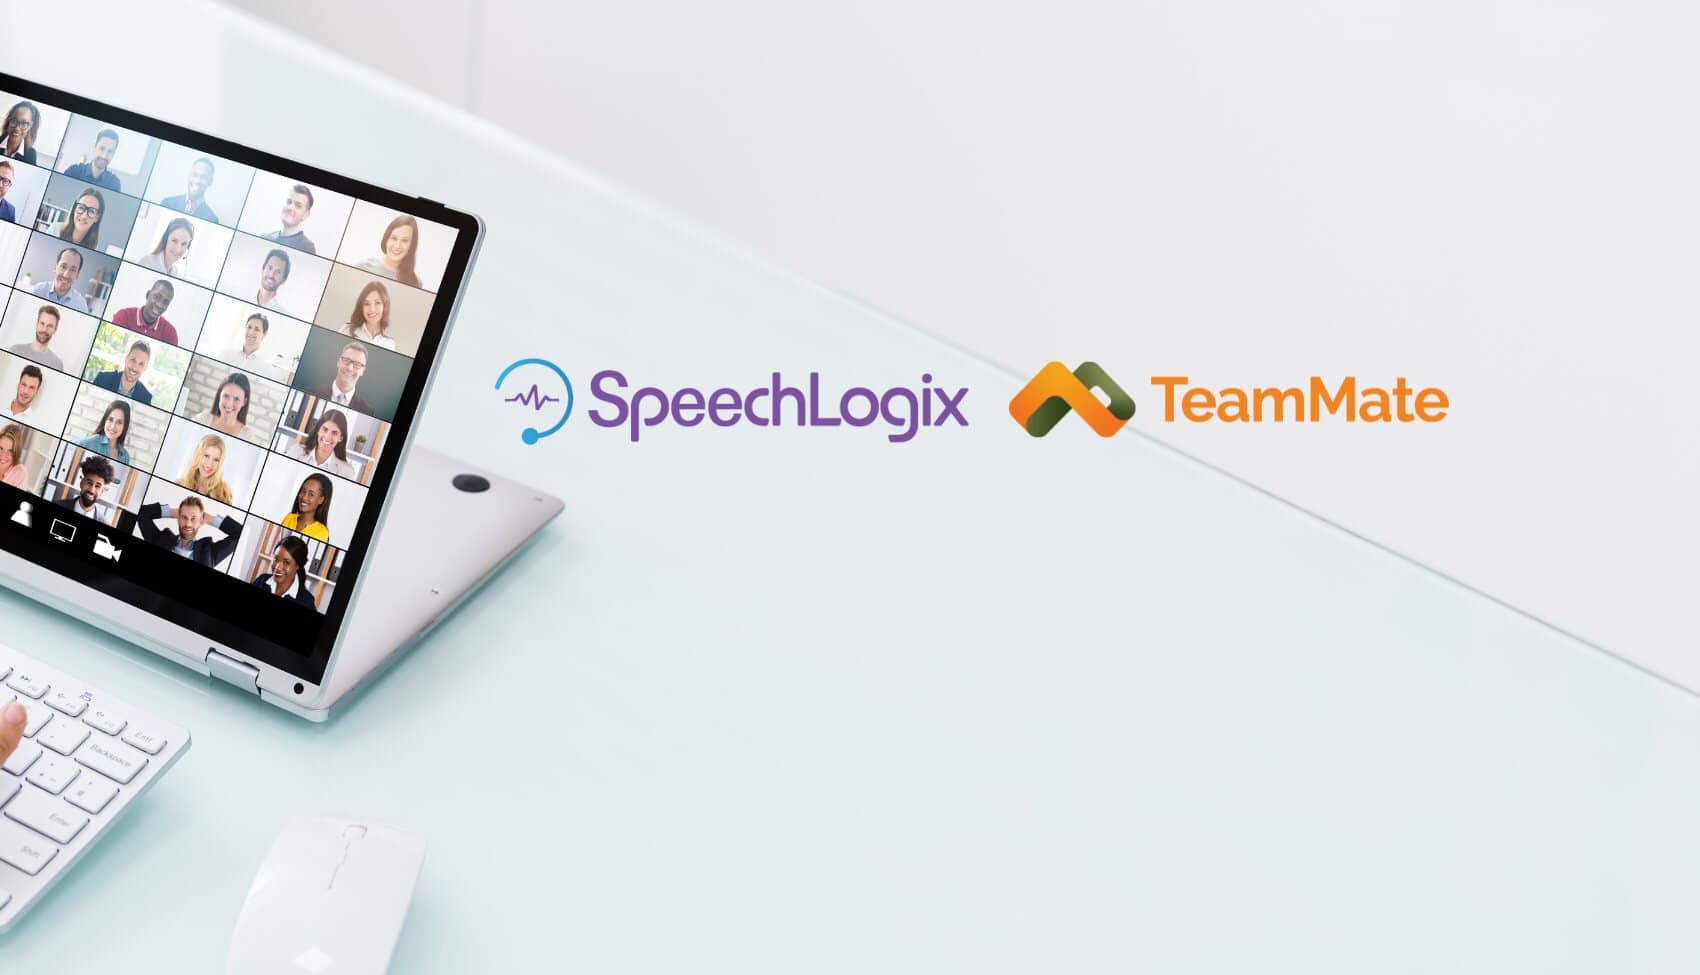 SpeechLogix & TeamMate enables operators extend carrier services with MS Teams.